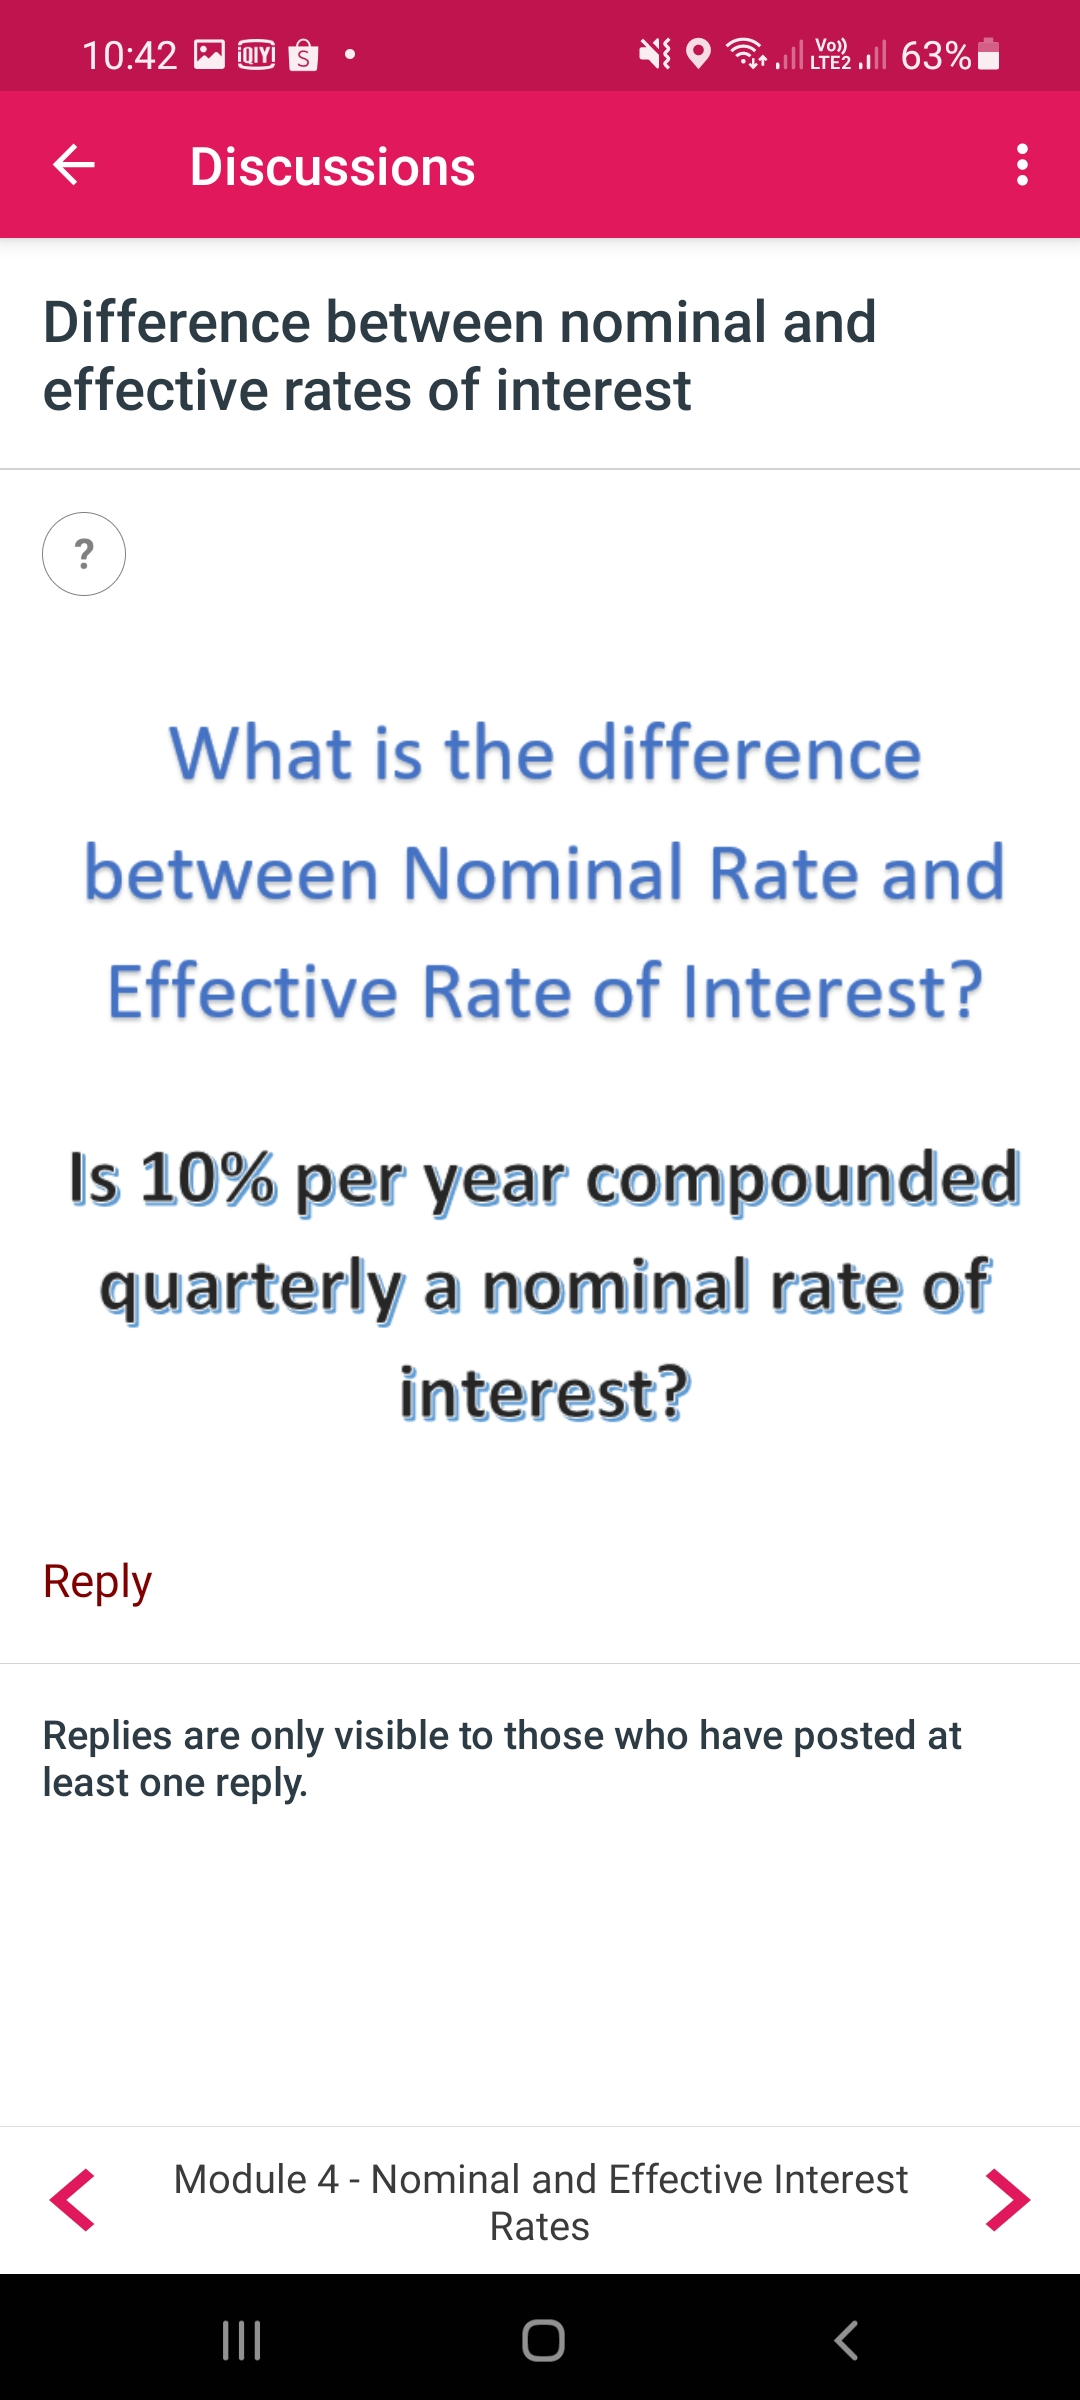 10:42
İQIY
we.l il, 63% iז
Vo)
LTE2
Discussions
Difference between nominal and
effective rates of interest
?
What is the difference
between Nominal Rate and
Effective Rate of Interest?
Is 10% per year compounded
quarterly a nominal rate of
interest?
Reply
Replies are only visible to those who have posted at
least one reply.
Module 4 - Nominal and Effective Interest
<>
Rates
